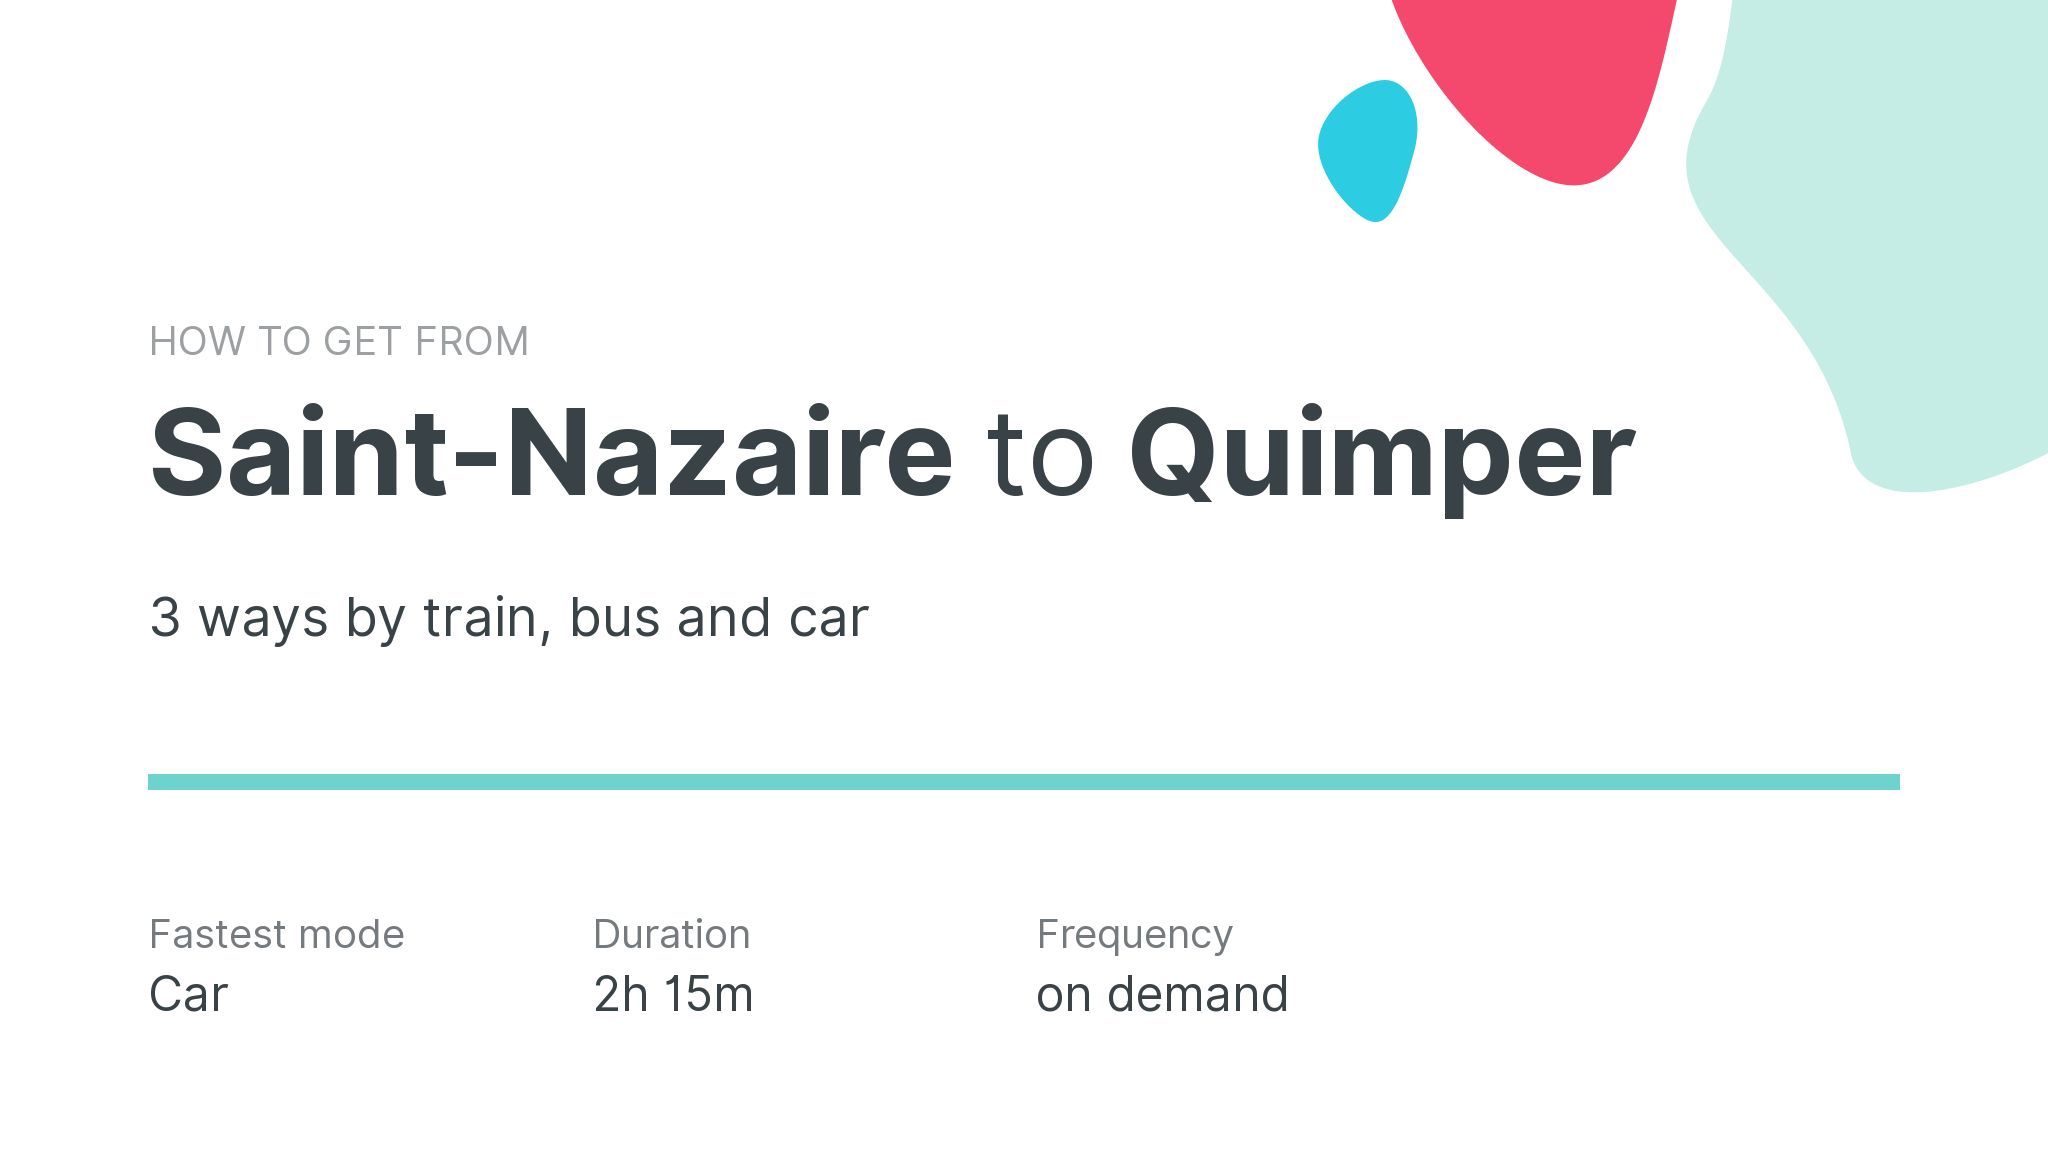 How do I get from Saint-Nazaire to Quimper